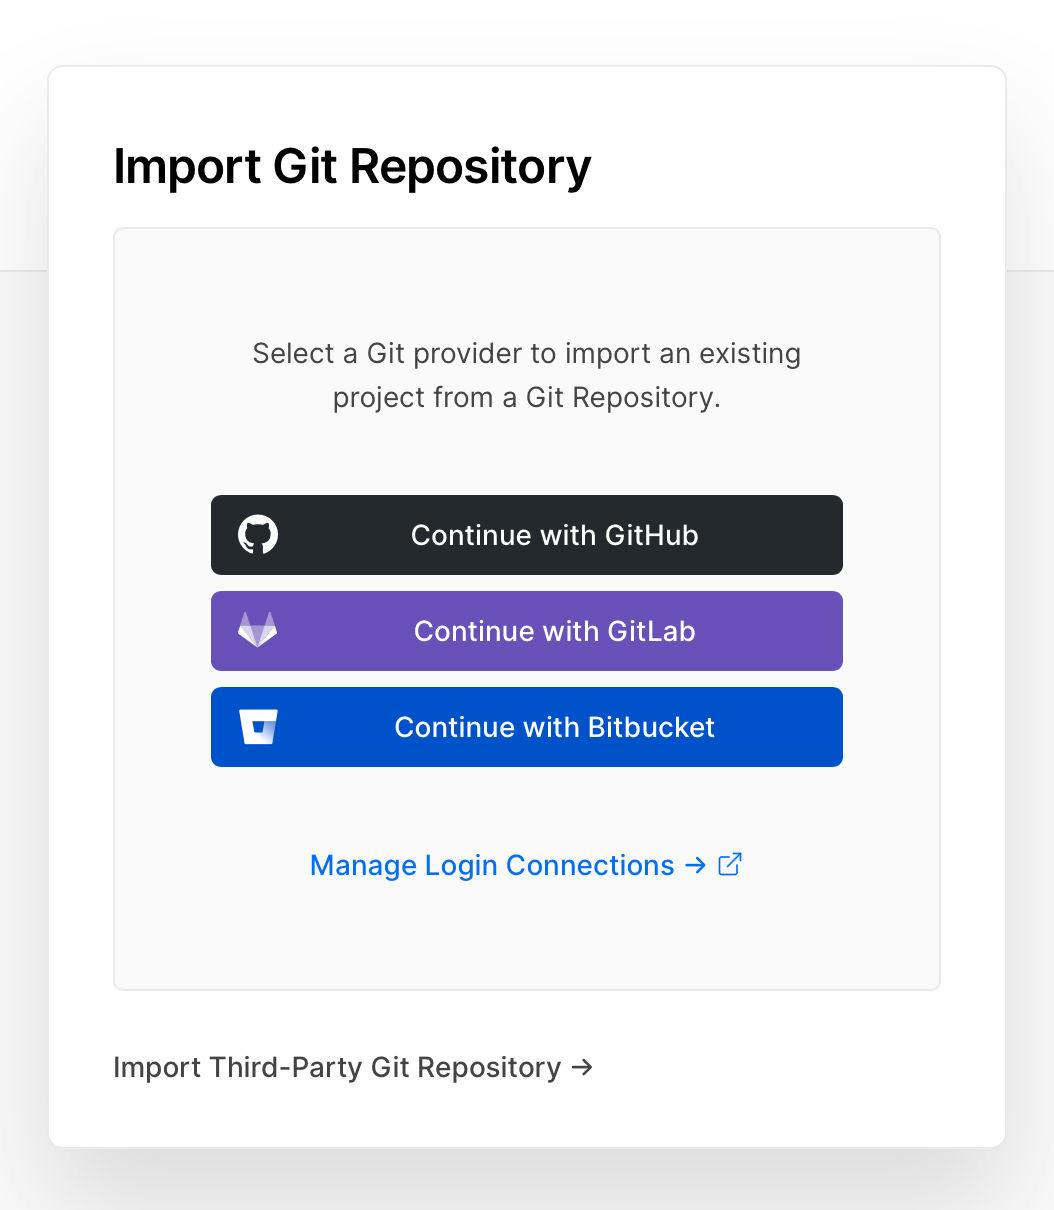 Screenshot of the Vercel UI to import a Git repository, showing the assisted options GitHub, GitLab, and Bitbucket, as well as a link to import a third-party Git repo